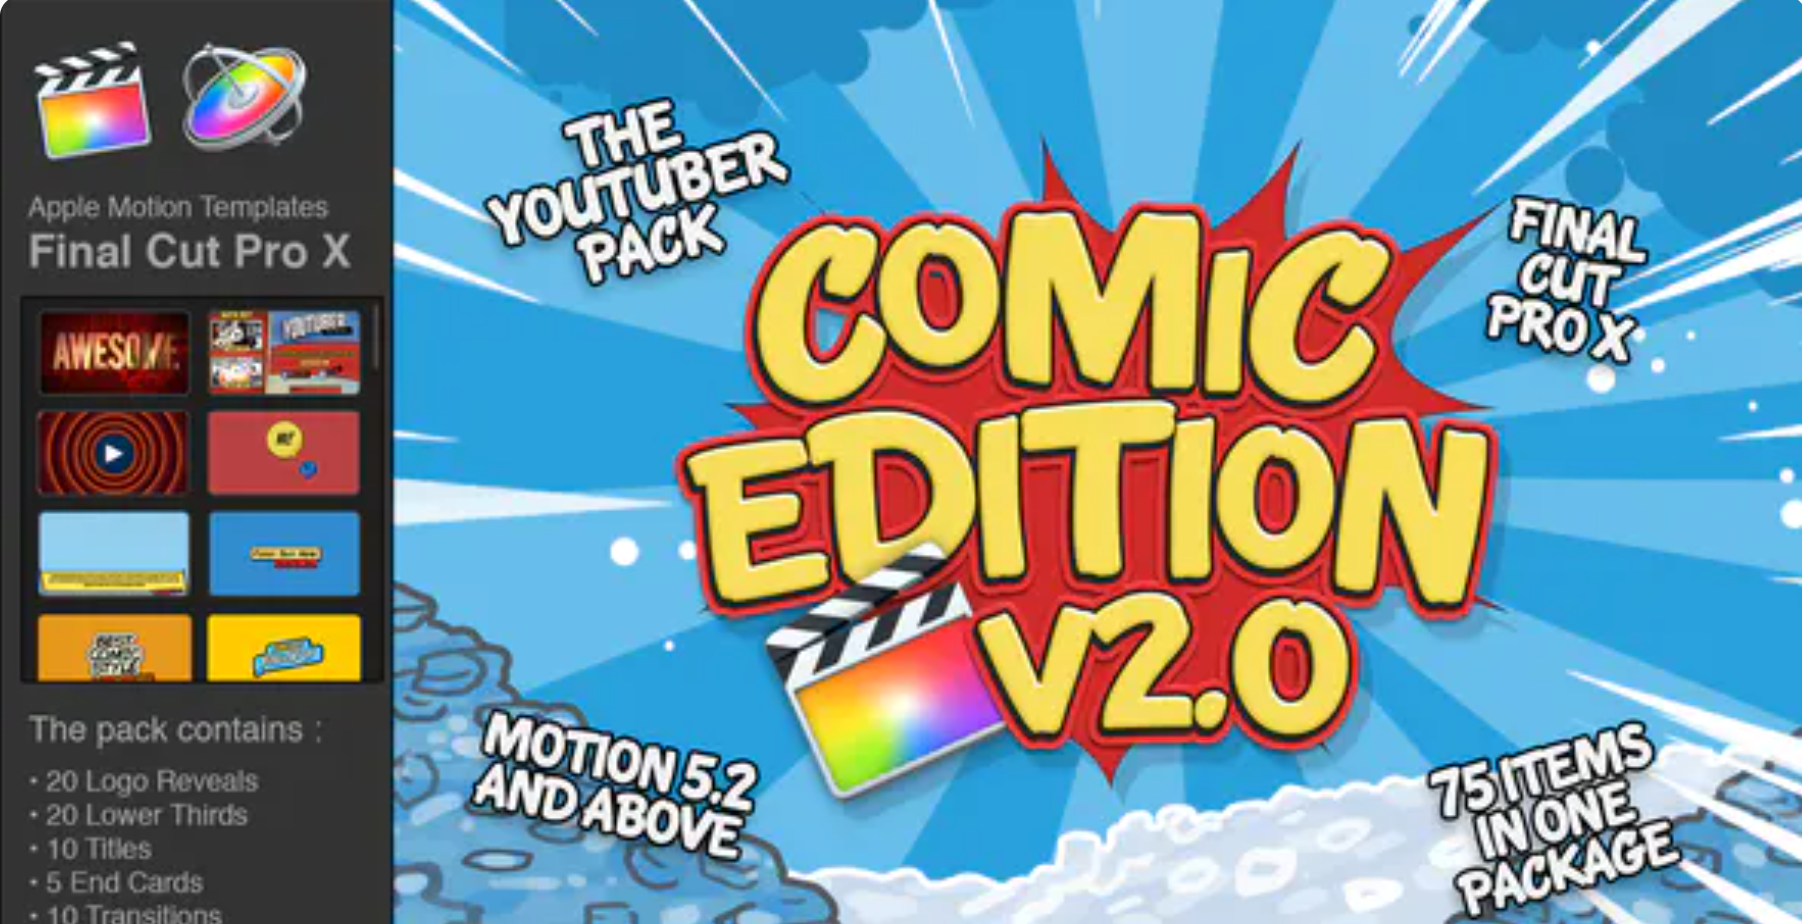 The YouTuber Pack - Comic Edition V2.0 - Final Cut Pro X 6